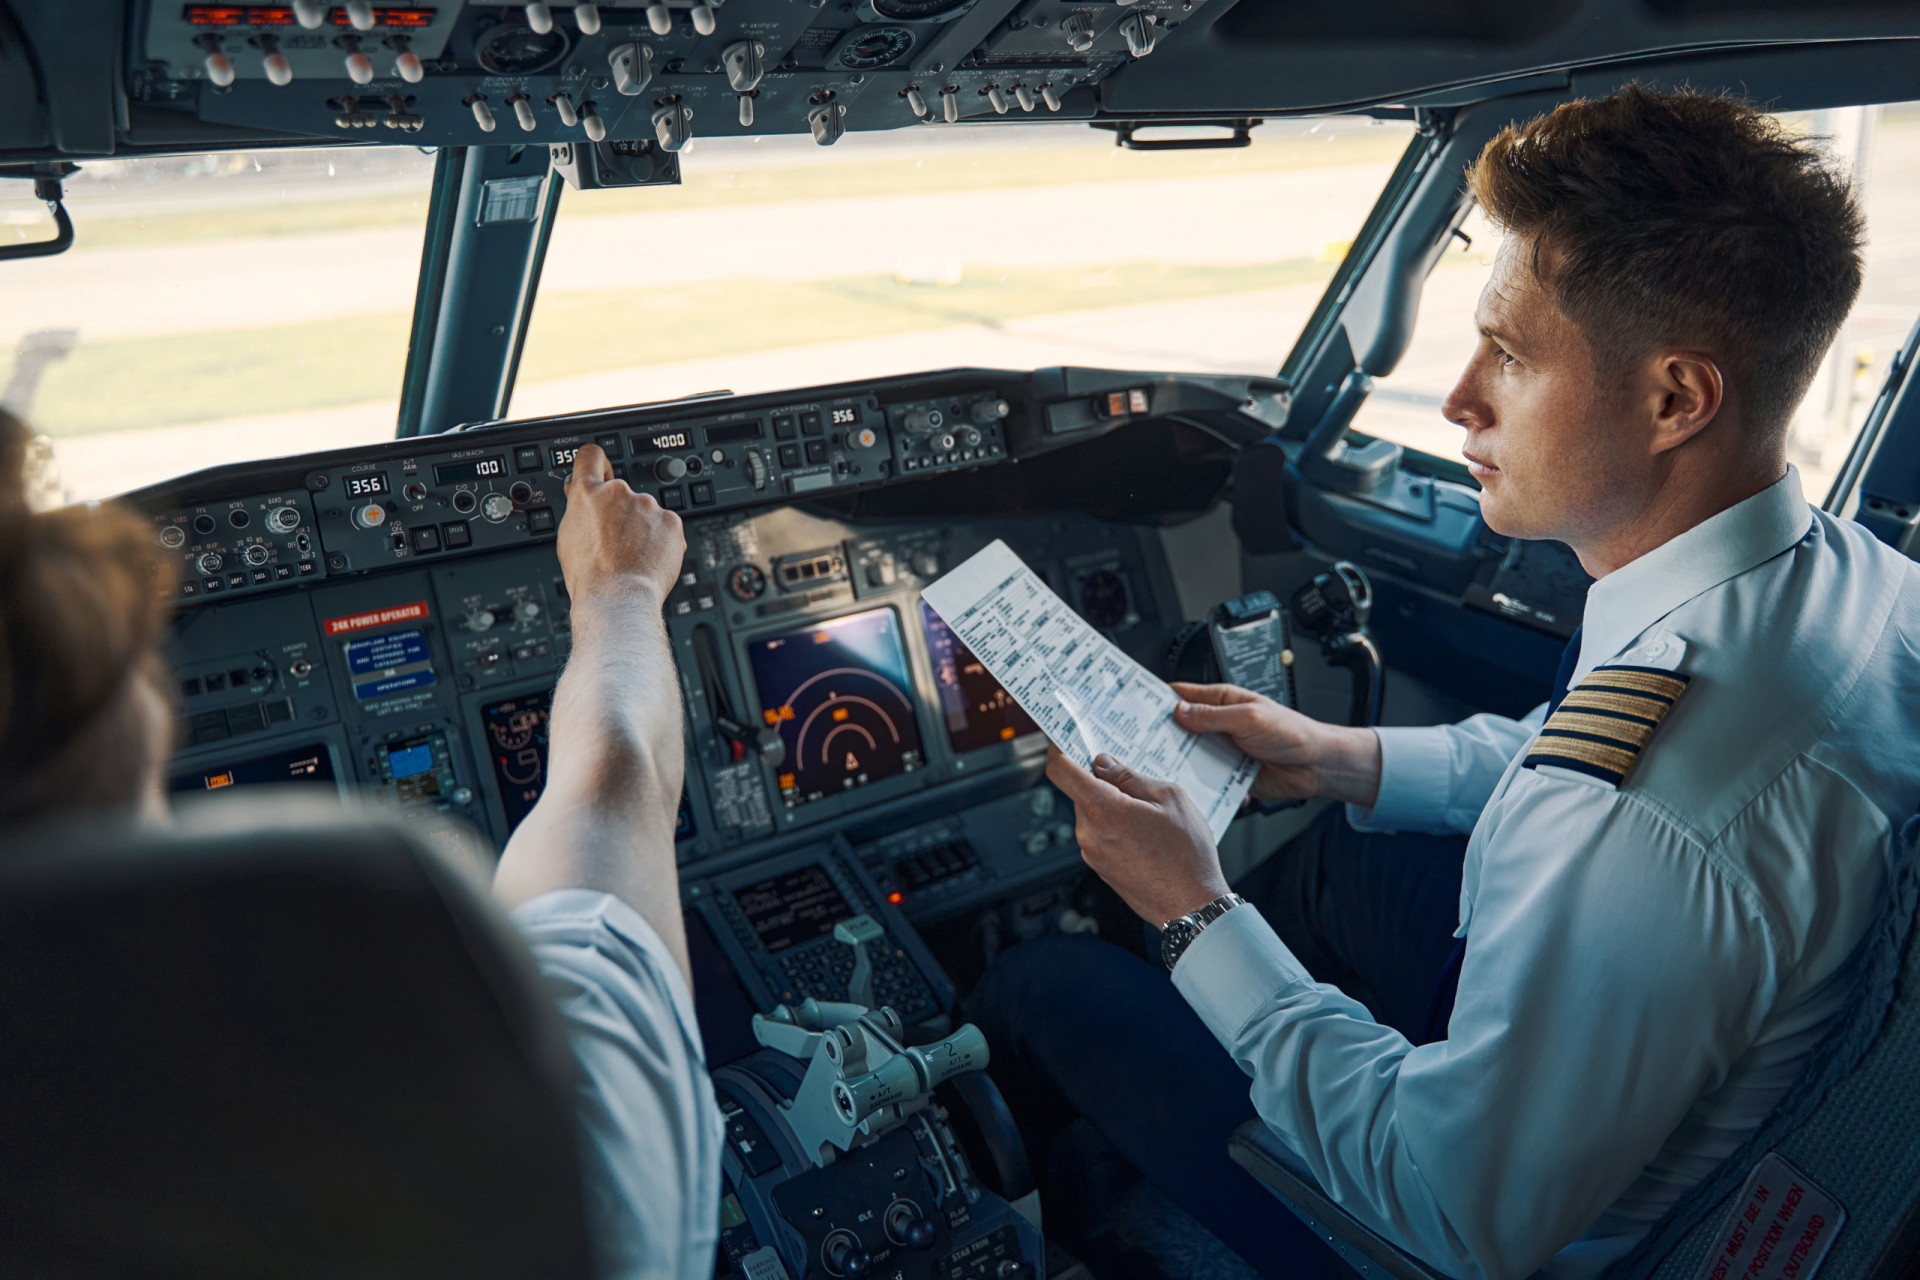 <p>The meaning of this phrase involves checking the plane's weight-and-balance record, revising the flight plan, or waiting for maintenance staff to finish updating the logbook. </p><p><a href="https://www.msn.com/en-us/community/channel/vid-7xx8mnucu55yw63we9va2gwr7uihbxwc68fxqp25x6tg4ftibpra?cvid=94631541bc0f4f89bfd59158d696ad7e">Follow us and access great exclusive content every day</a></p>